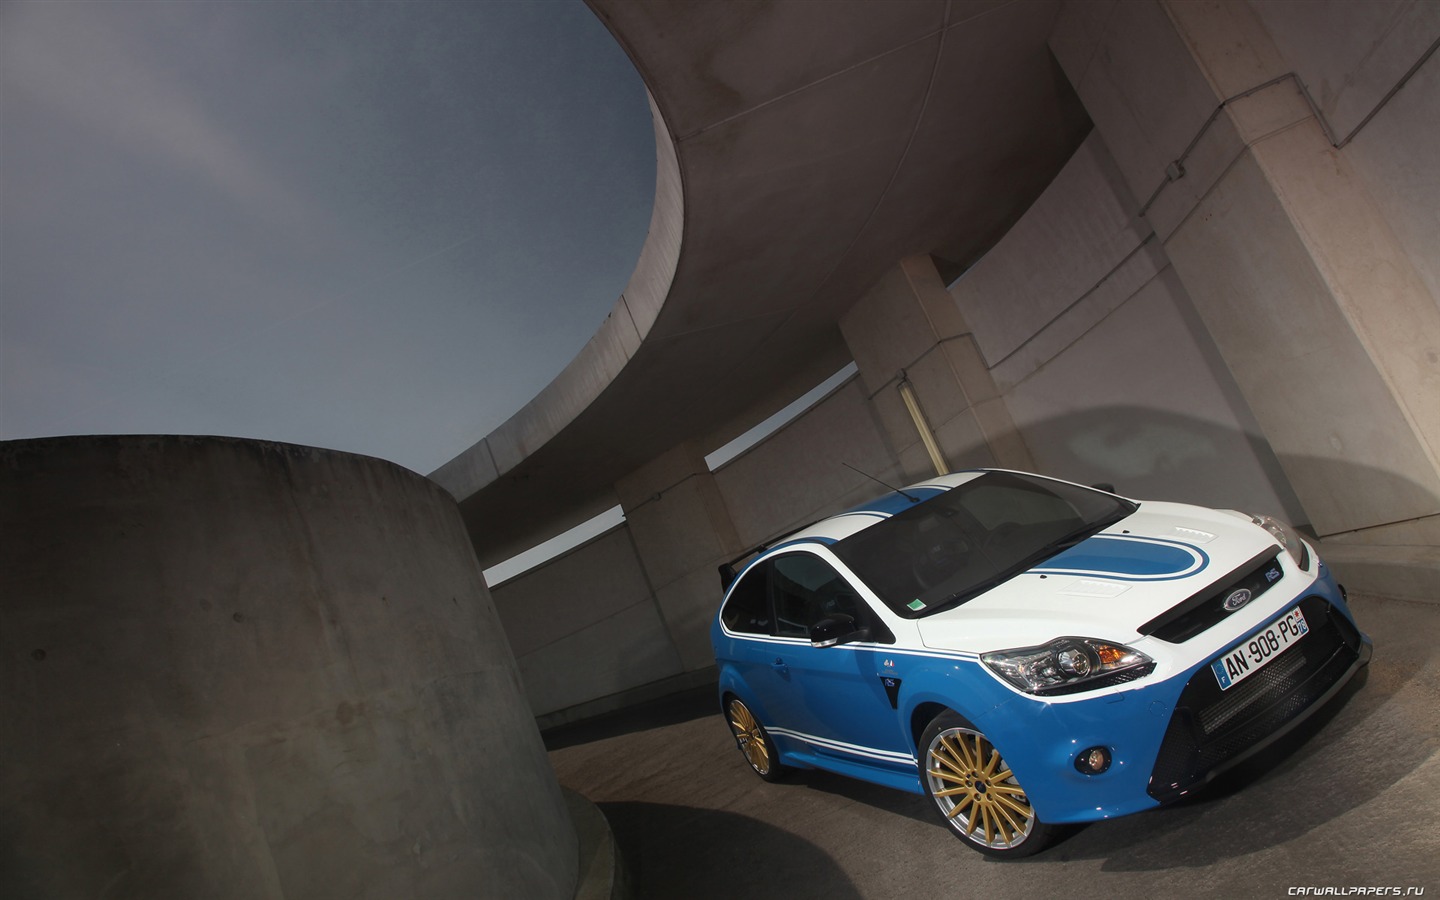 Ford Focus RS Le Mans Classic - 2010 福特4 - 1440x900